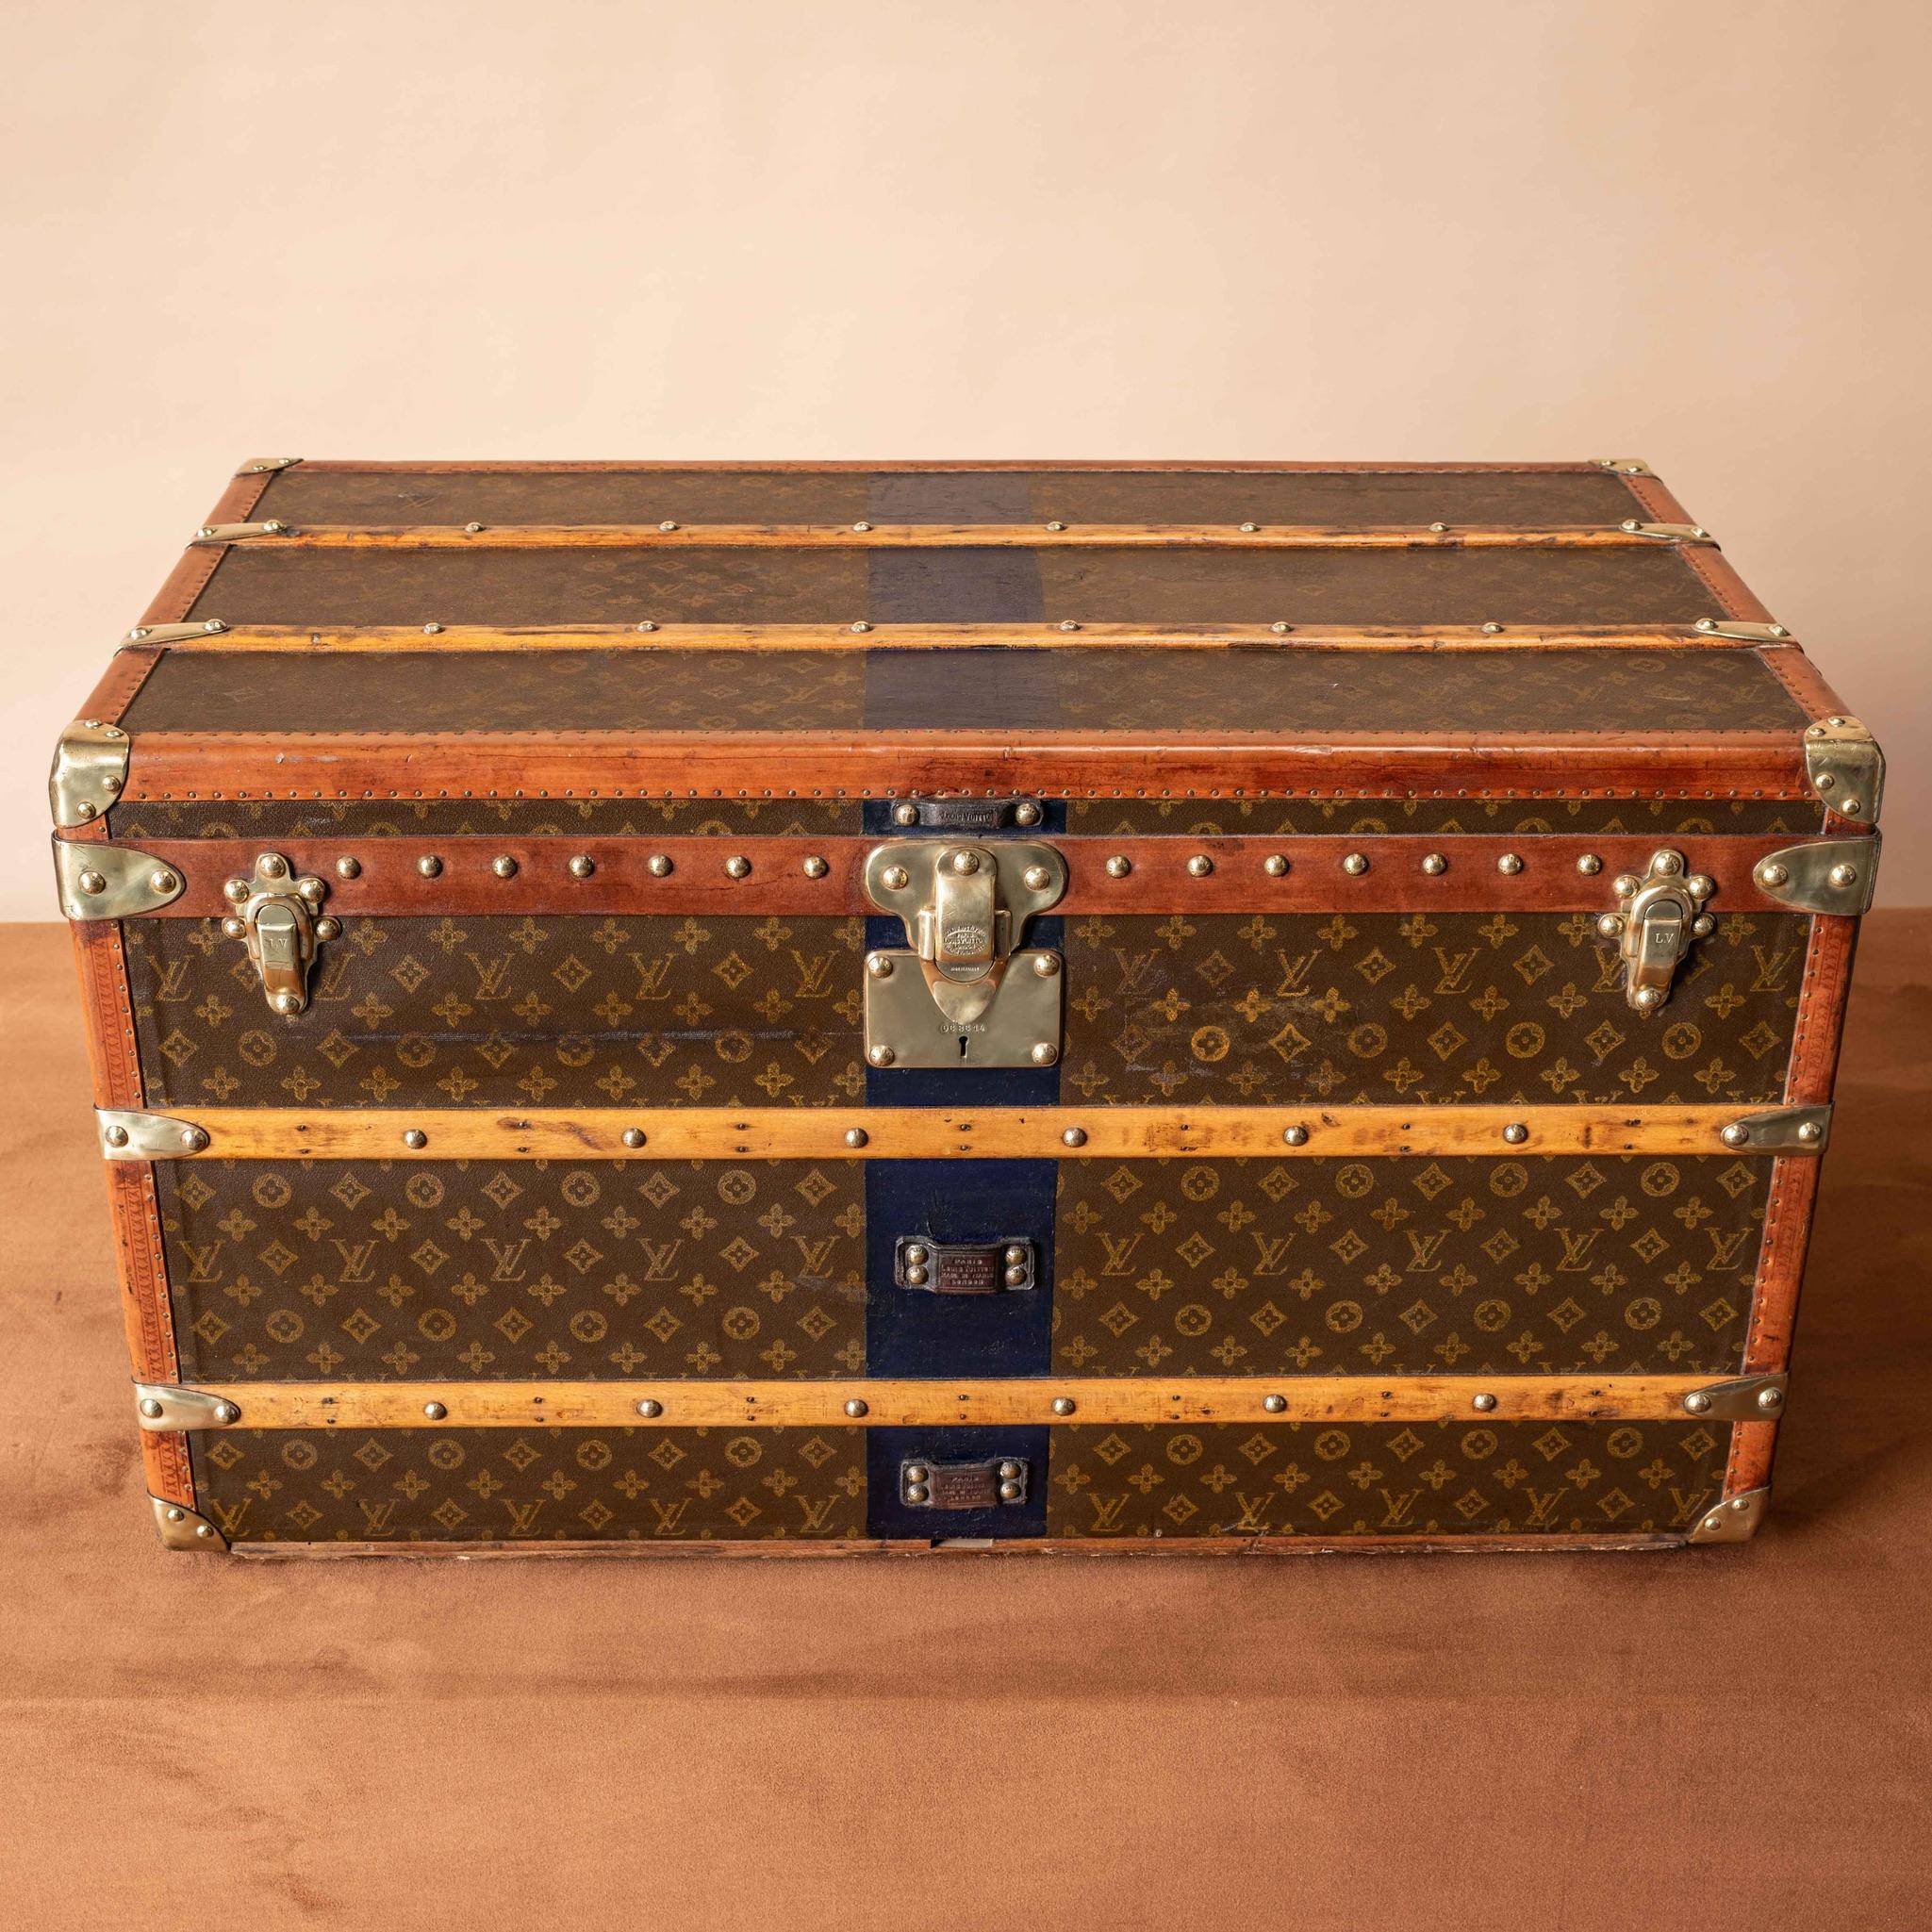 
An attractive Louis Vuitton steamer trunk with polished brass fittings, lozine trim, leather handles and original interior with full complement of trays. Circa 1935.

Dimensions: 91.5 cm/36 inches (length) x 52 cm/20½ inches (depth) x 50.5 cm/19⅞